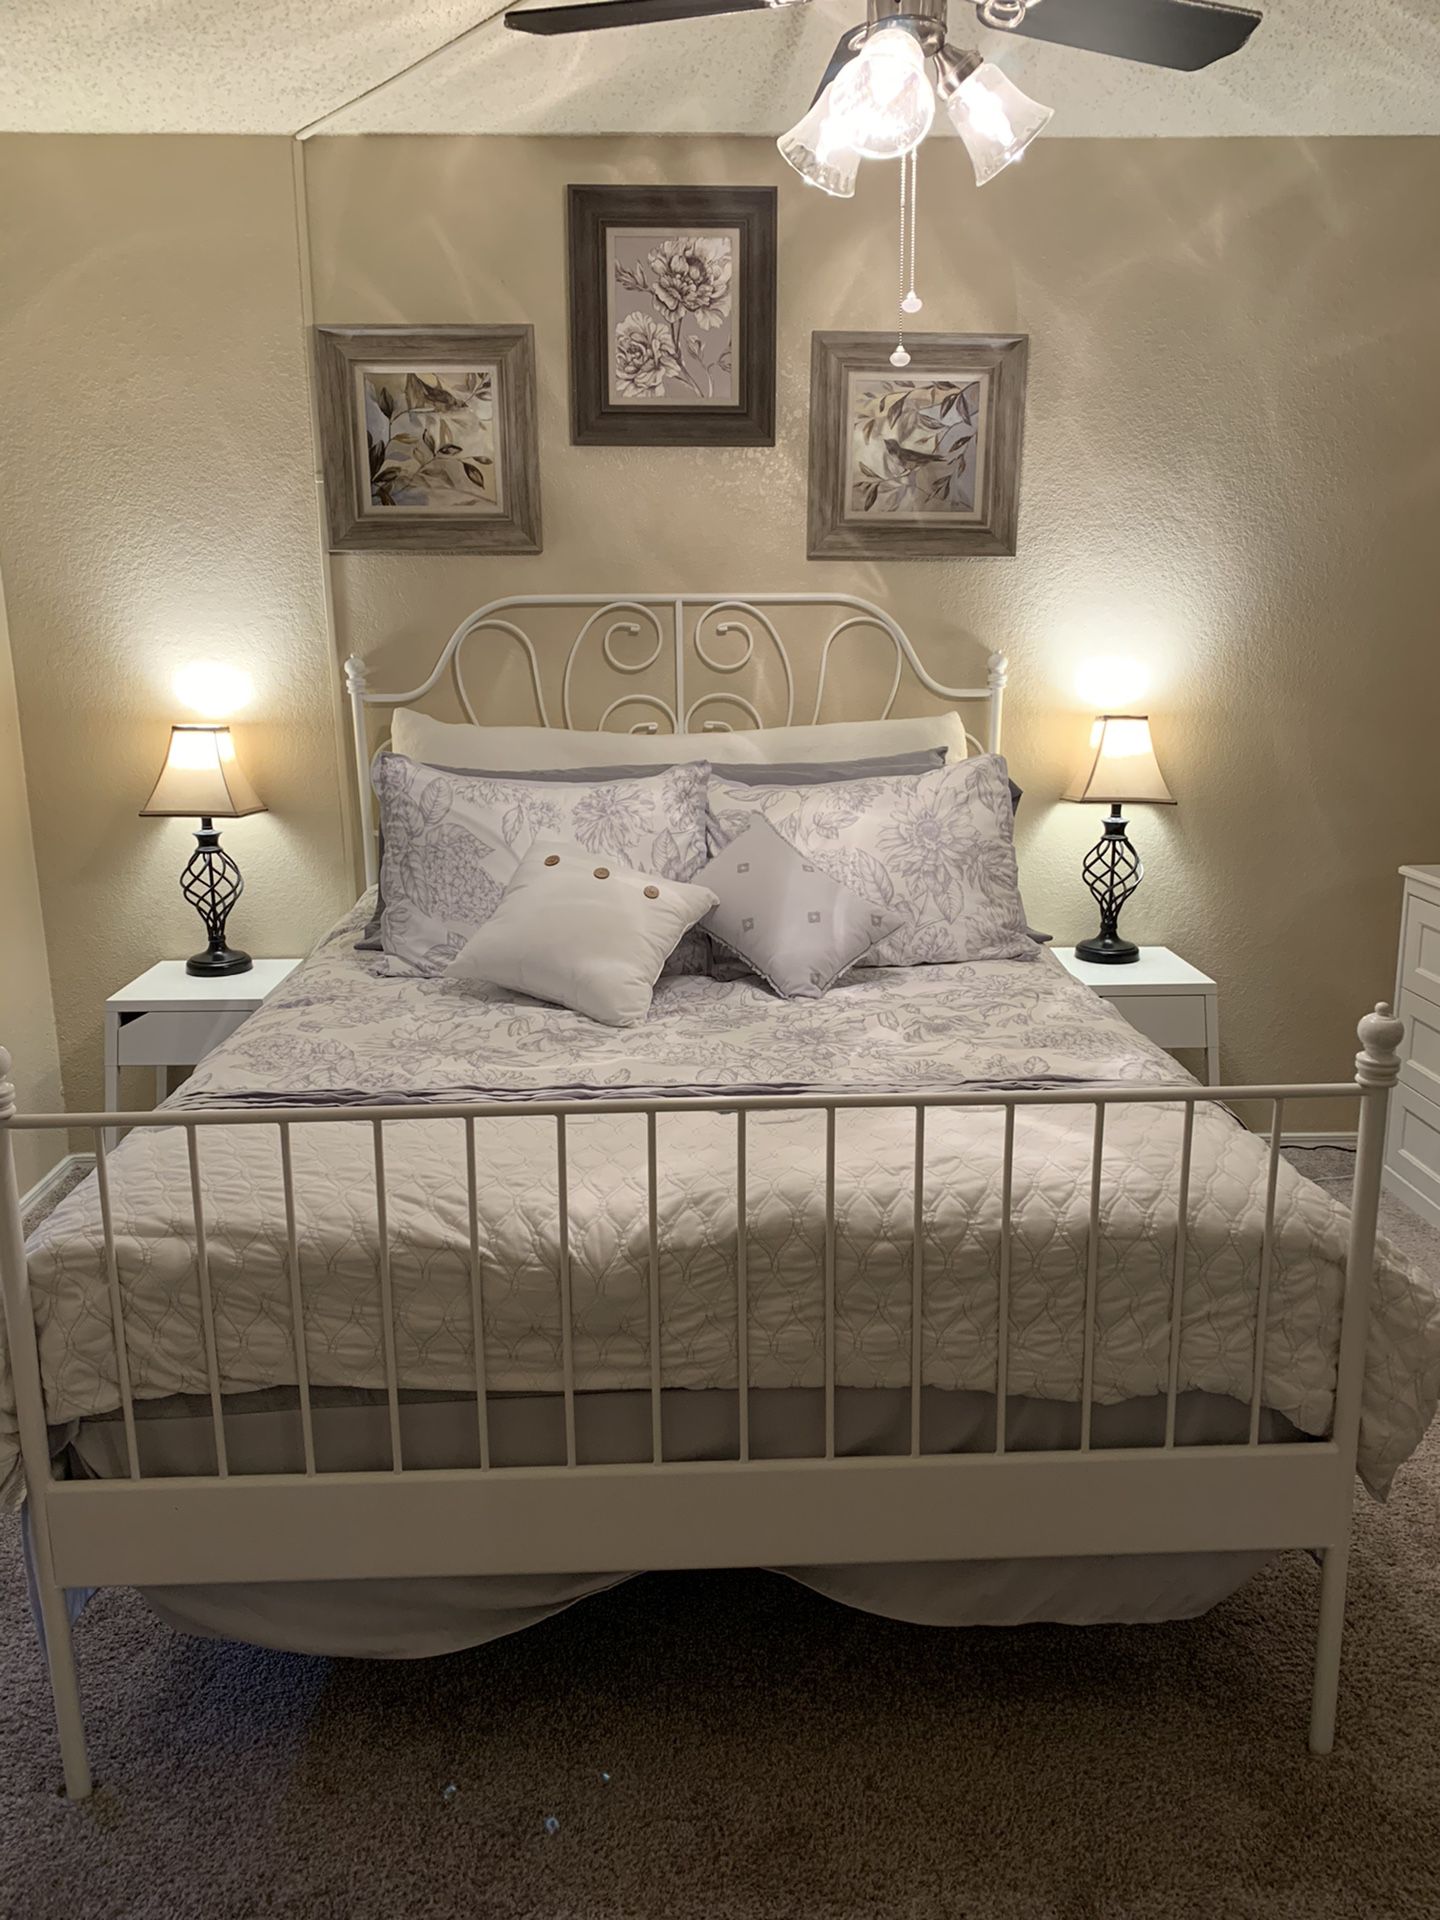 Bed frame (queen), side tables, lamps, wall decor